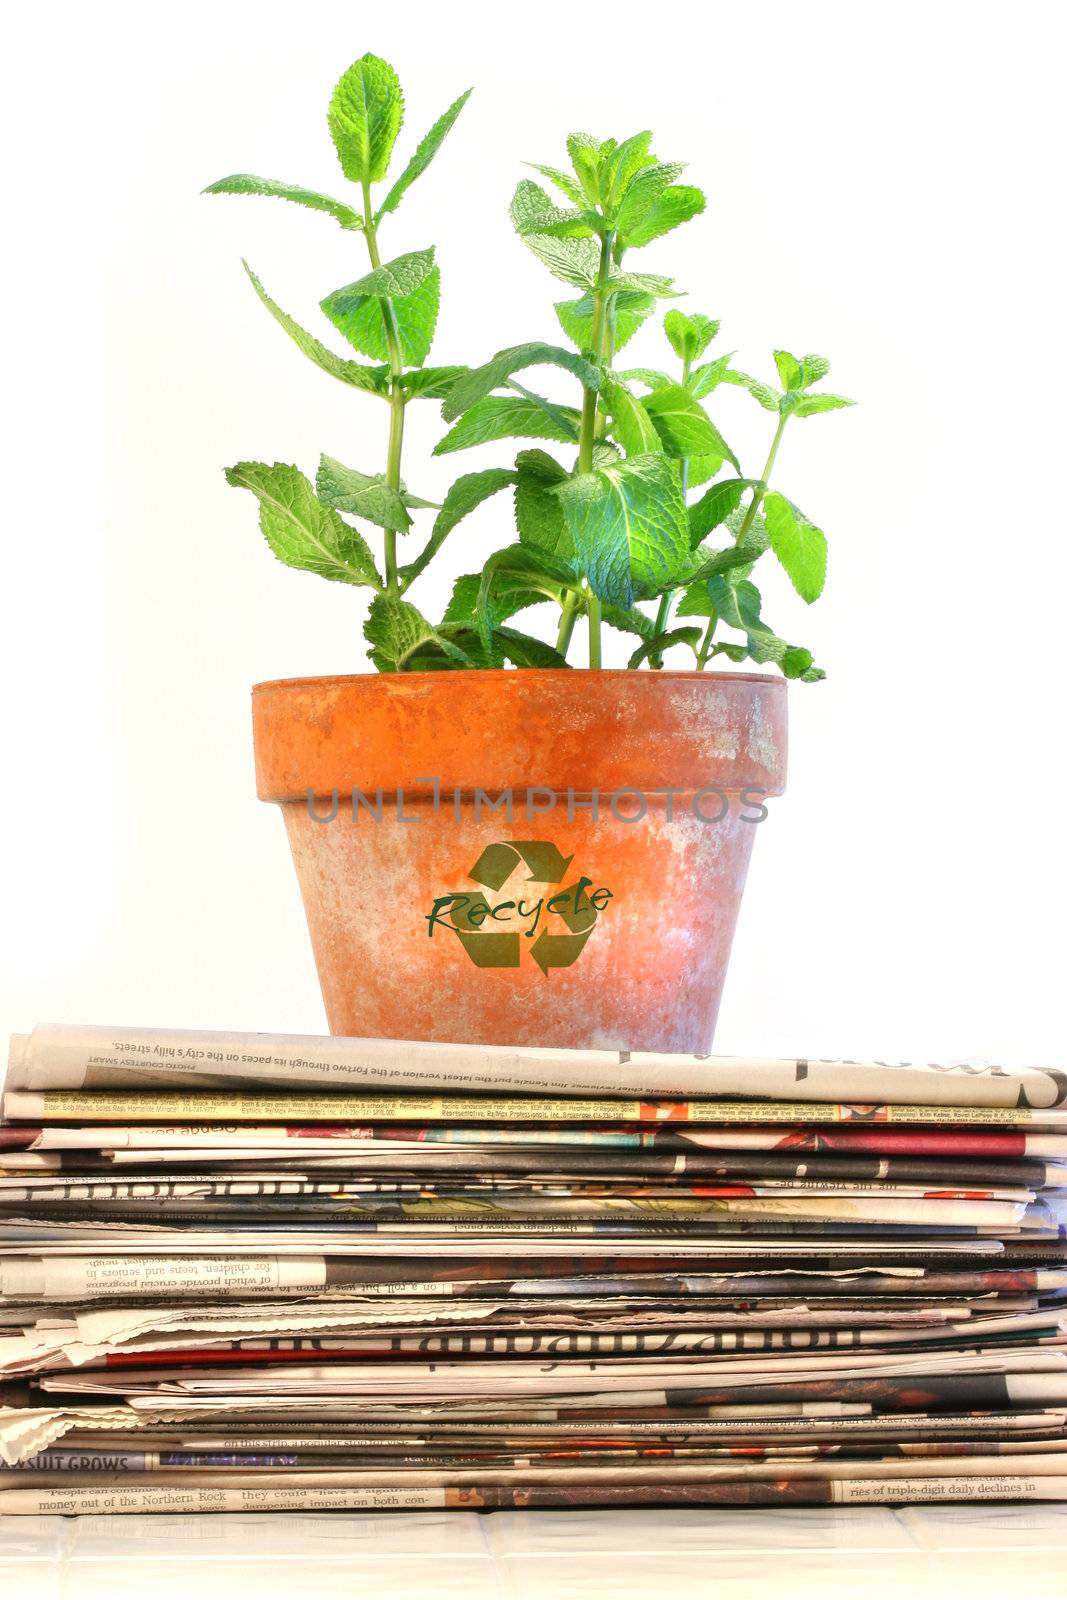 Potted plant on a stack of newspapers against white background